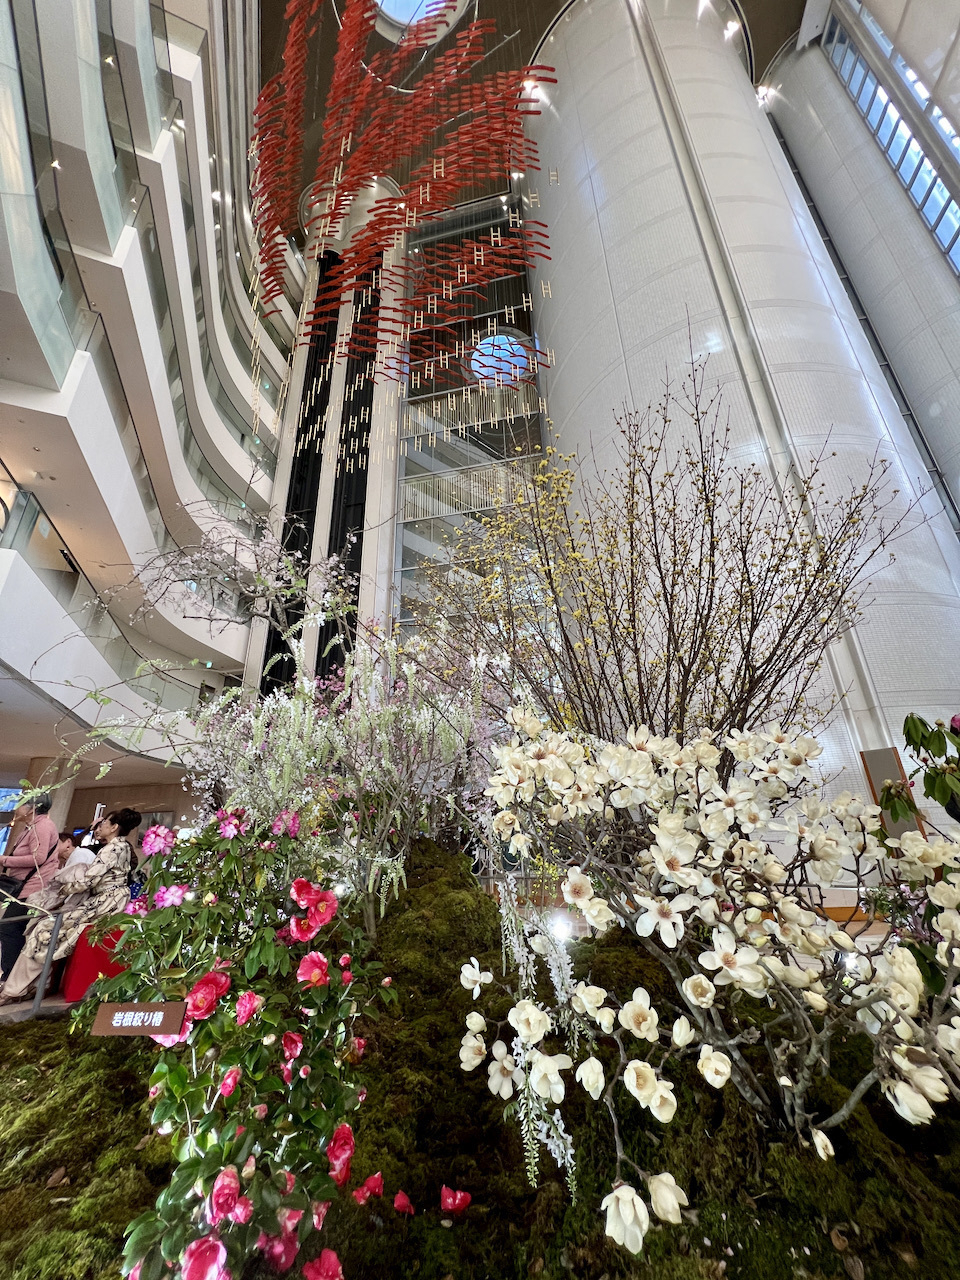 Flowering trees inside of a hotel lobby. A low shot showing the high cieling of the hotel